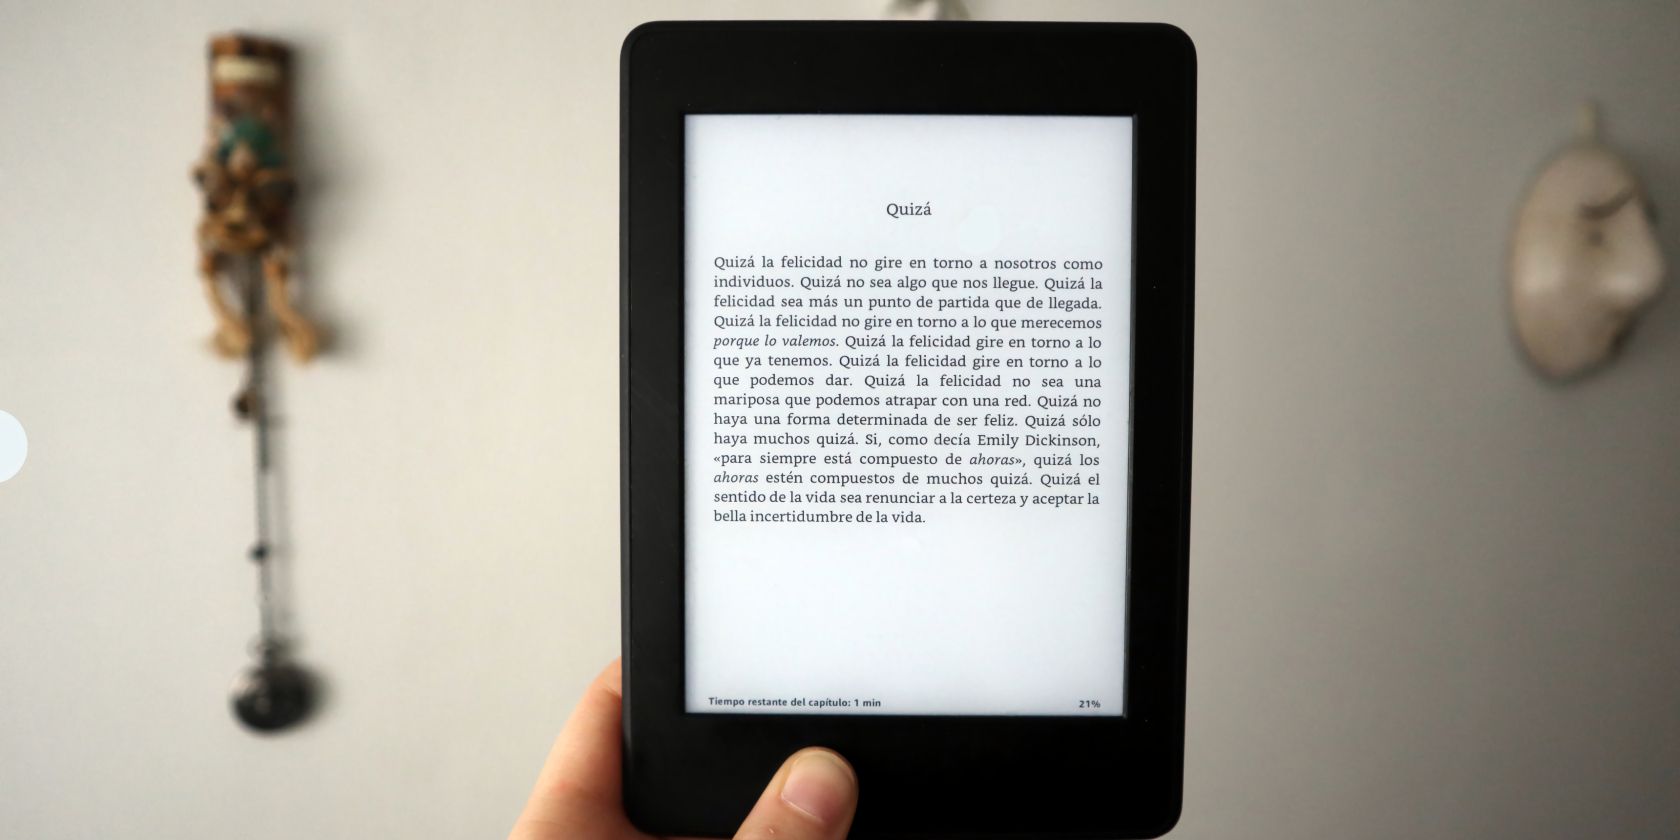 e-reader being held up by hand